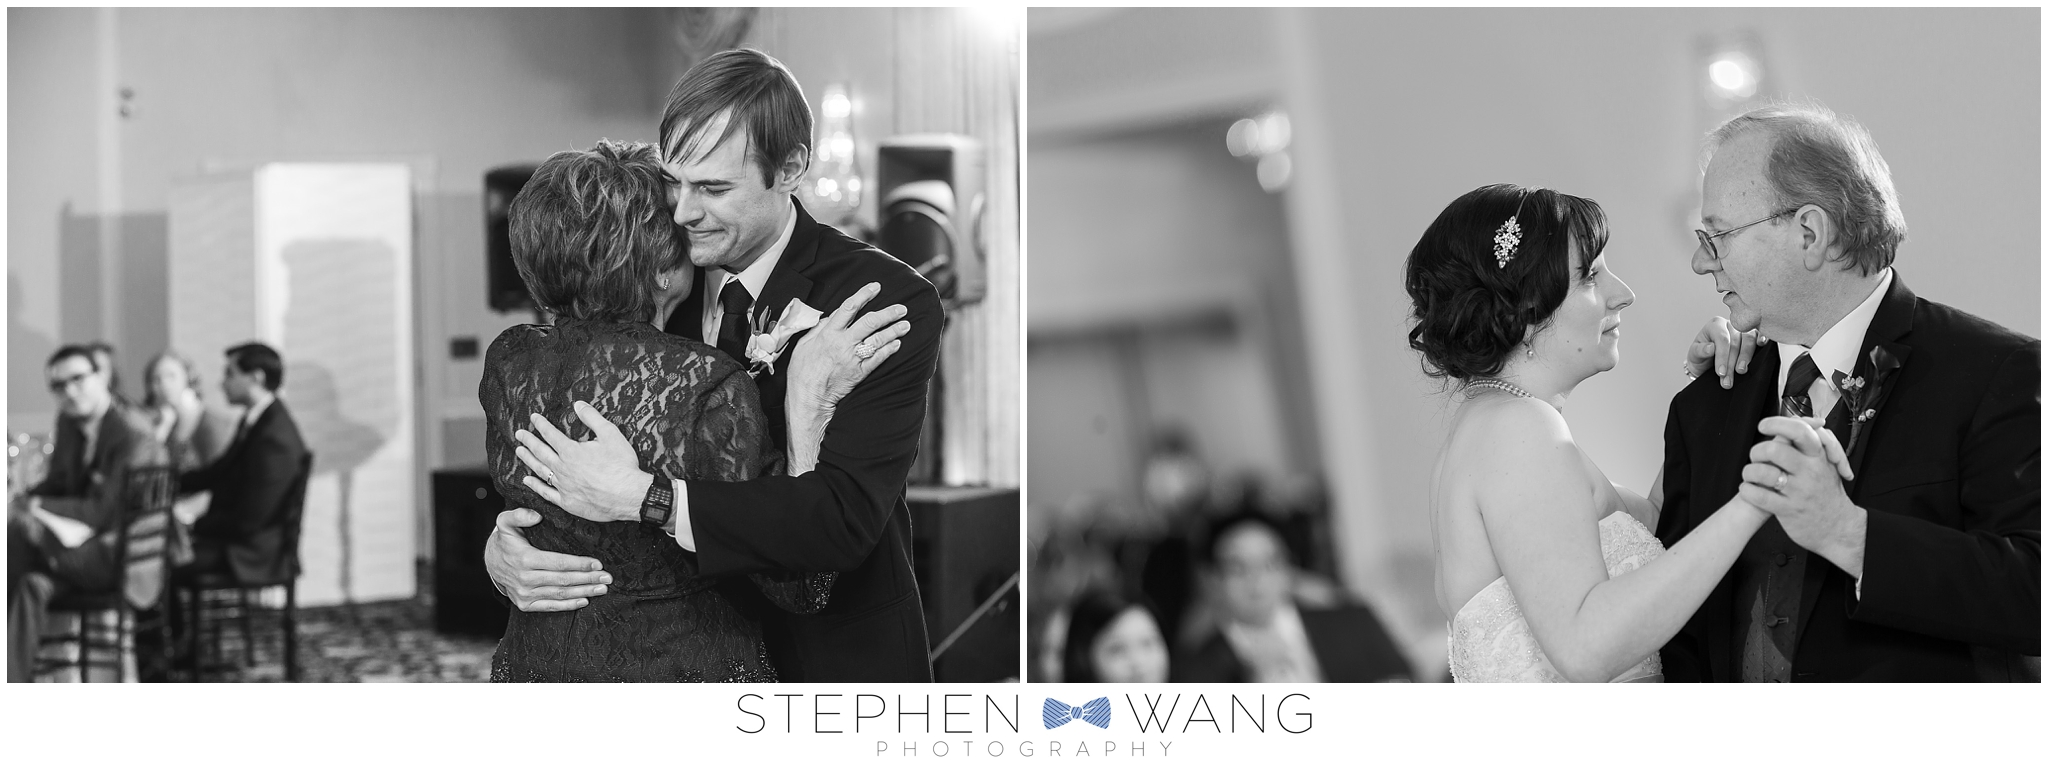 Stephen Wang Photography Wedding Connecticut CT Belle Terrace Avon Old Farms New England Wedding New Haven-11-17_0026.jpg